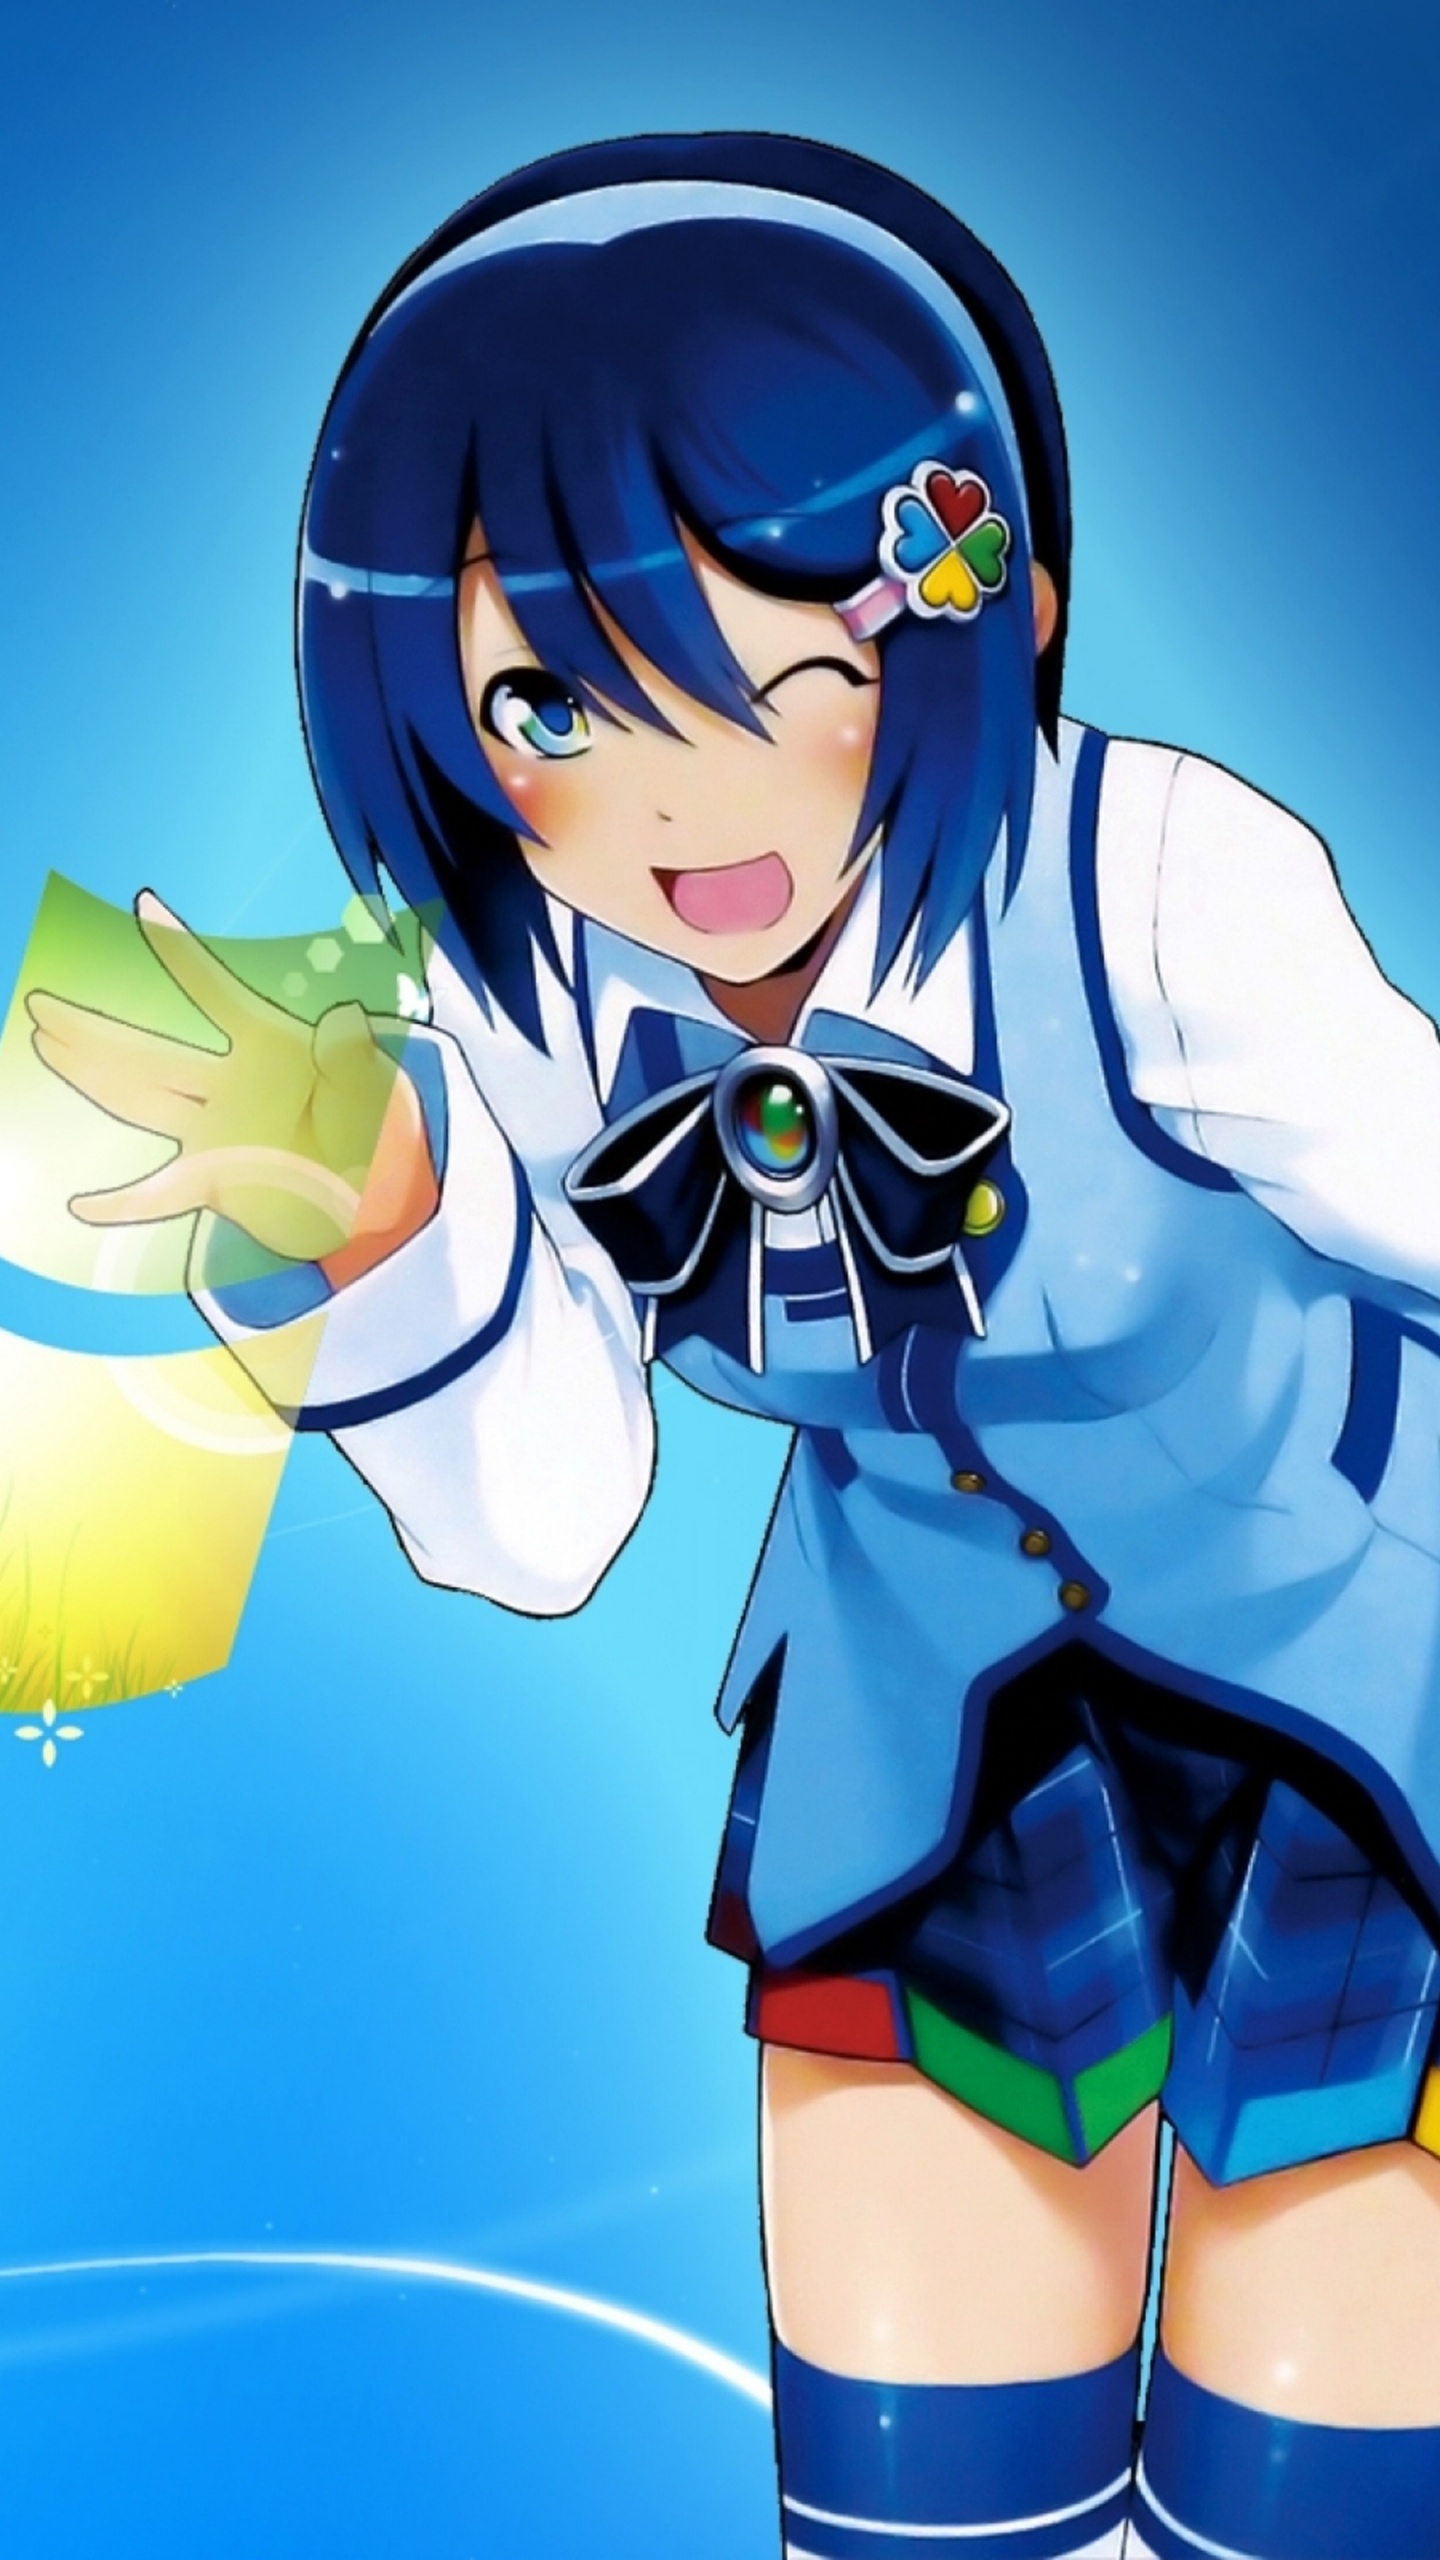 Woman in Blue and White School Uniform Anime Character. Wallpaper in 1440x2560 Resolution